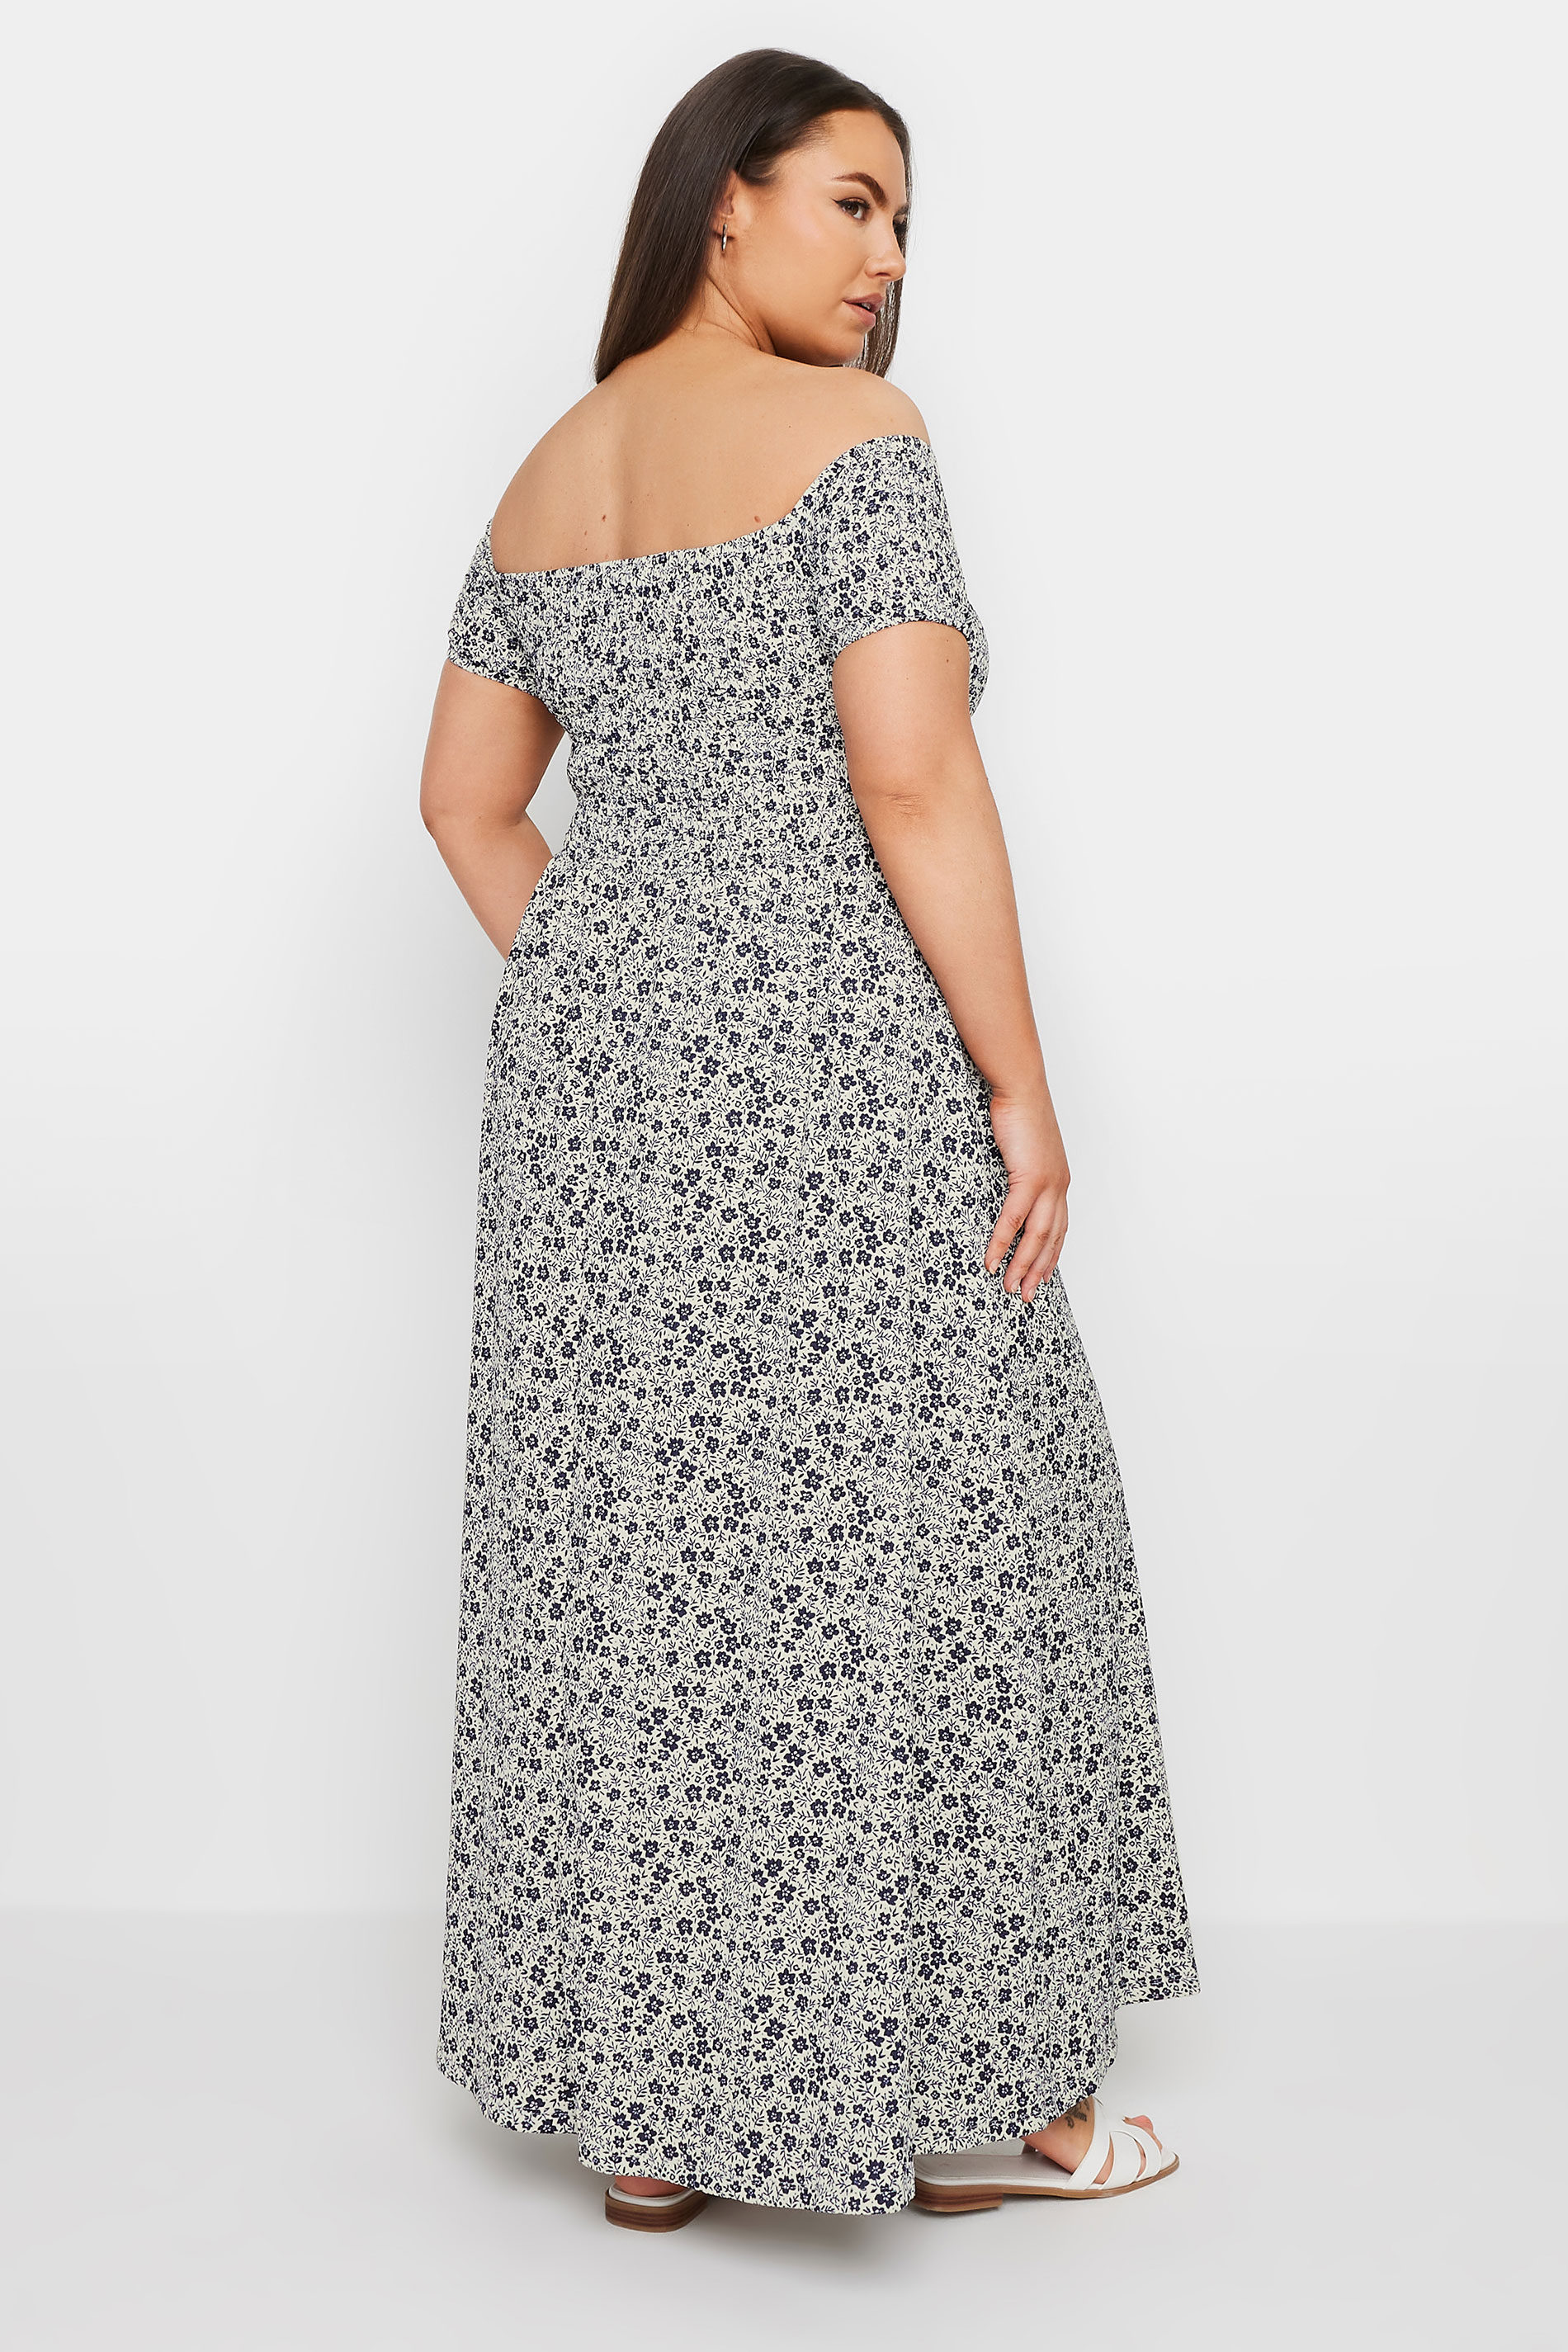 YOURS Plus Size Grey Floral Print Bardot Midaxi Dress | Yours Clothing 3